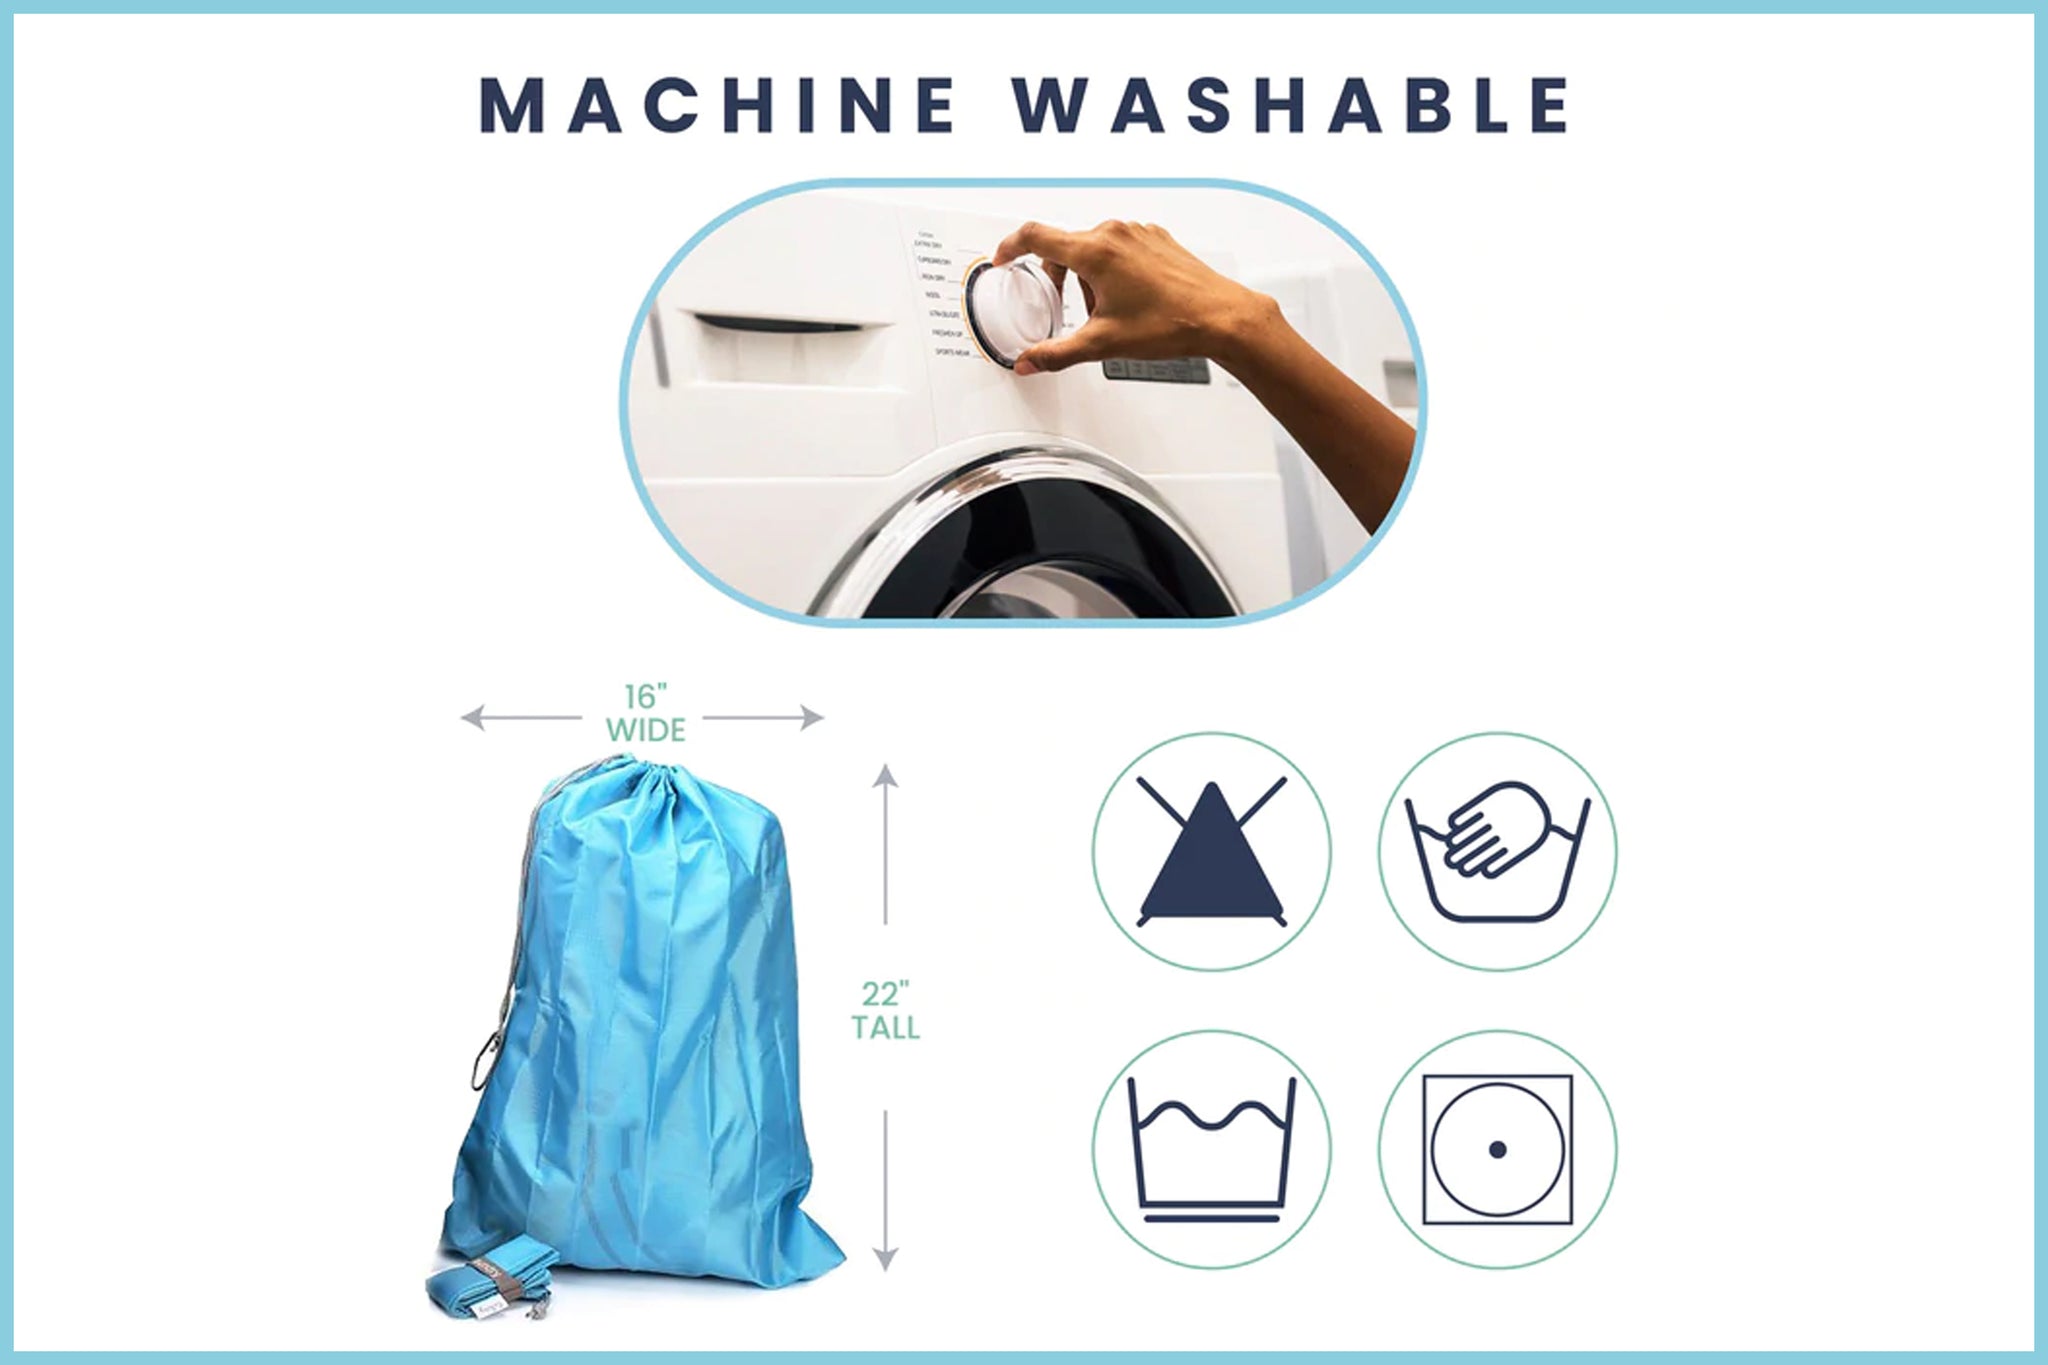 Portable Laundry Backpacks : dirty clothes